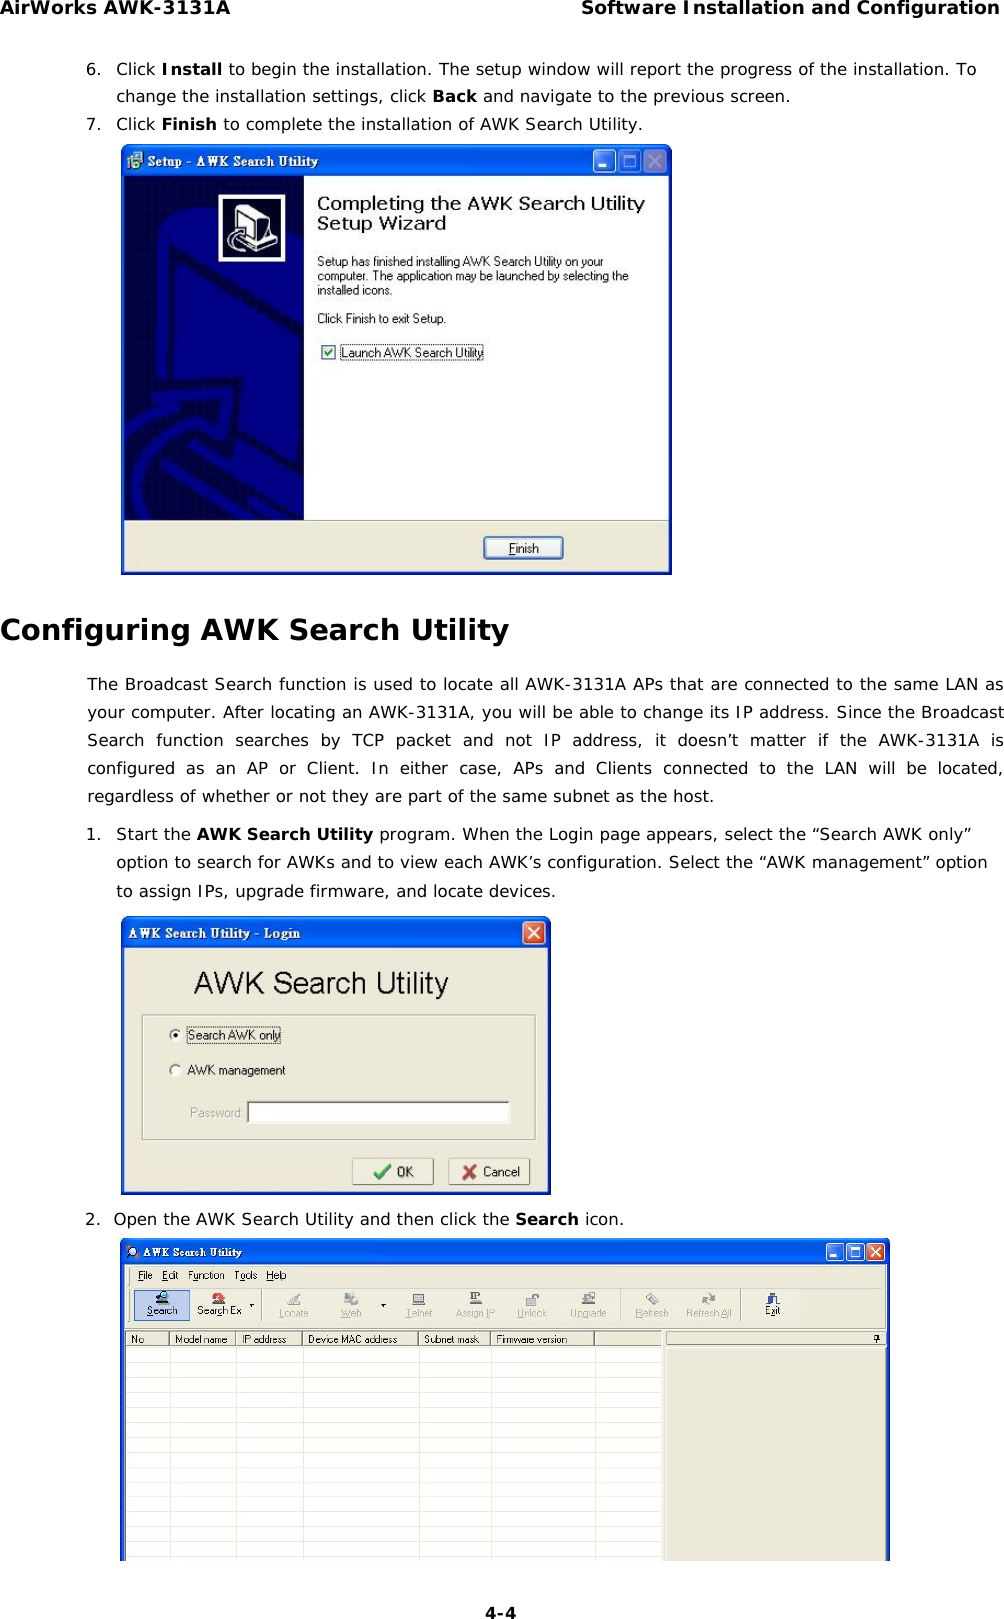 AirWorks AWK-3131A Software Installation and Configuration  6. Click Install to begin the installation. The setup window will report the progress of the installation. To change the installation settings, click Back and navigate to the previous screen.   7. Click Finish to complete the installation of AWK Search Utility.                        Configuring AWK Search Utility  The Broadcast Search function is used to locate all AWK-3131A APs that are connected to the same LAN as your computer. After locating an AWK-3131A, you will be able to change its IP address. Since the Broadcast Search function searches by TCP packet and not IP address, it doesn’t matter if the AWK-3131A is configured as an AP or Client. In either case, APs and Clients connected to the LAN will be located, regardless of whether or not they are part of the same subnet as the host.  1. Start the AWK Search Utility program. When the Login page appears, select the “Search AWK only” option to search for AWKs and to view each AWK’s configuration. Select the “AWK management” option to assign IPs, upgrade firmware, and locate devices.                2.  Open the AWK Search Utility and then click the Search icon.                  4-4 